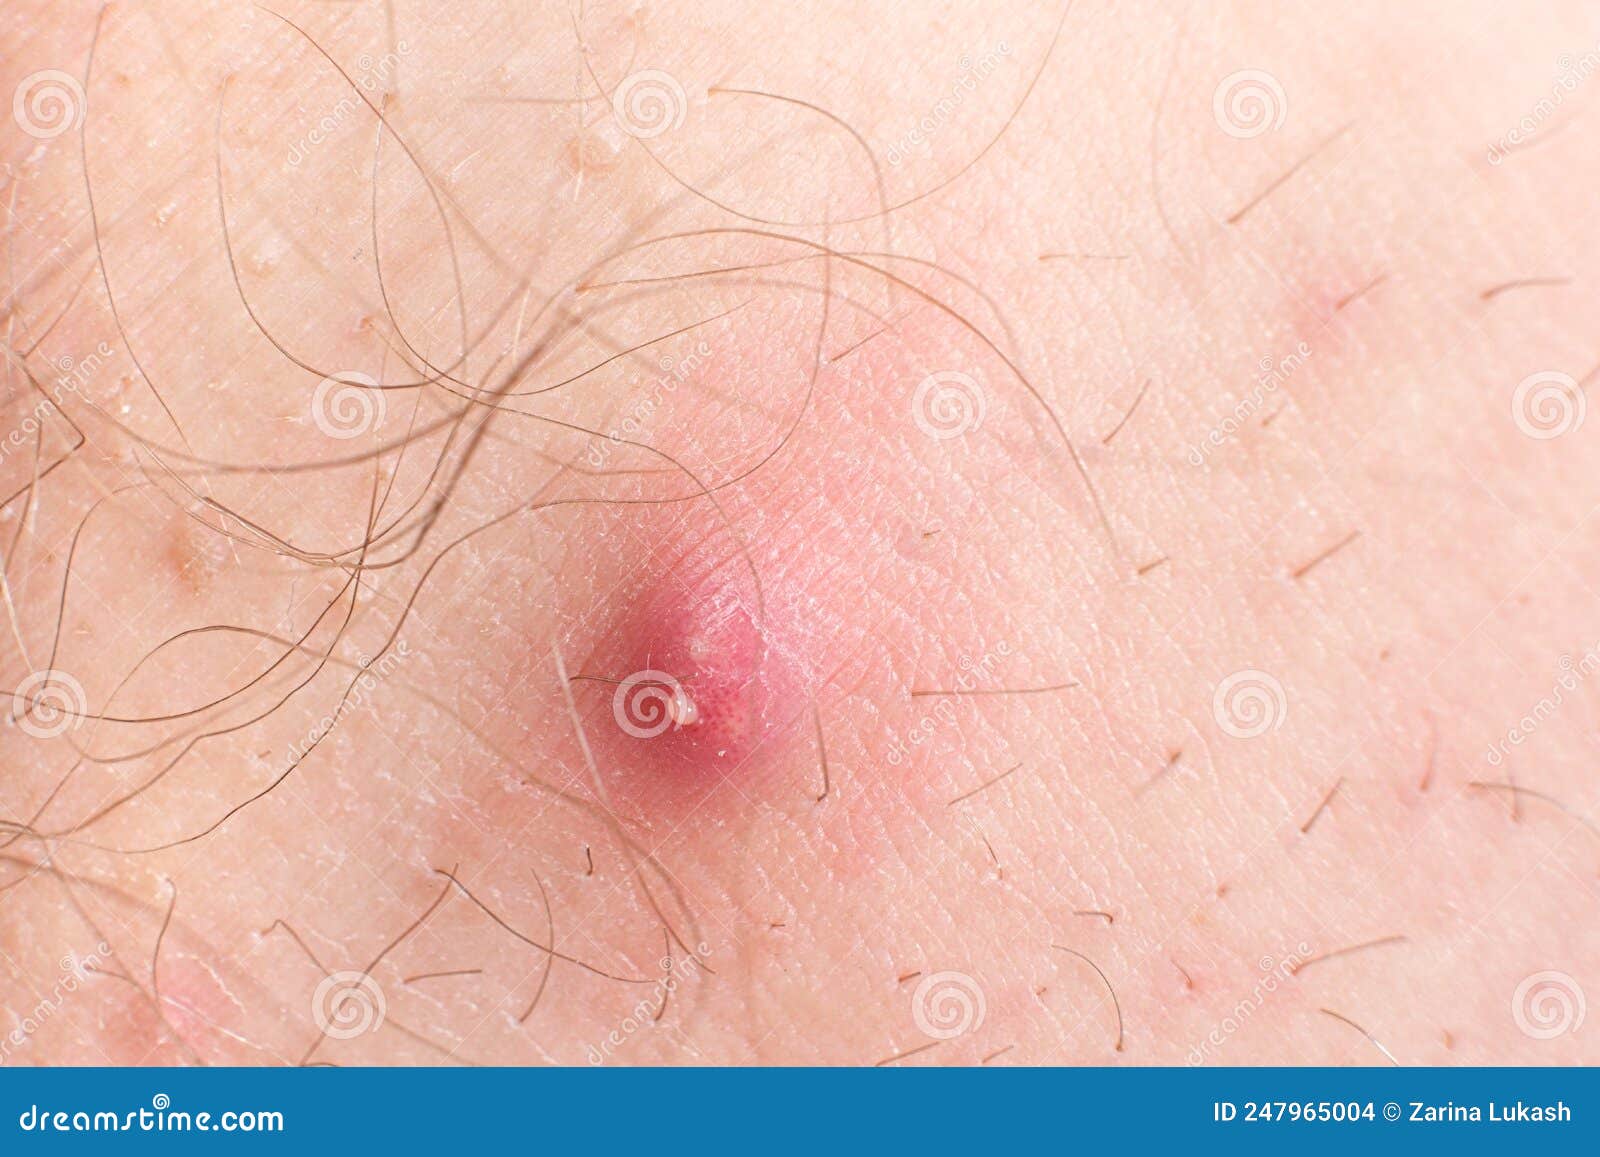 Postkort bronze Ligegyldighed Macro Photo of a Large Red Pimple with the Release of Pus on Human Skin  Stock Photo - Image of skincare, dermatology: 247965004